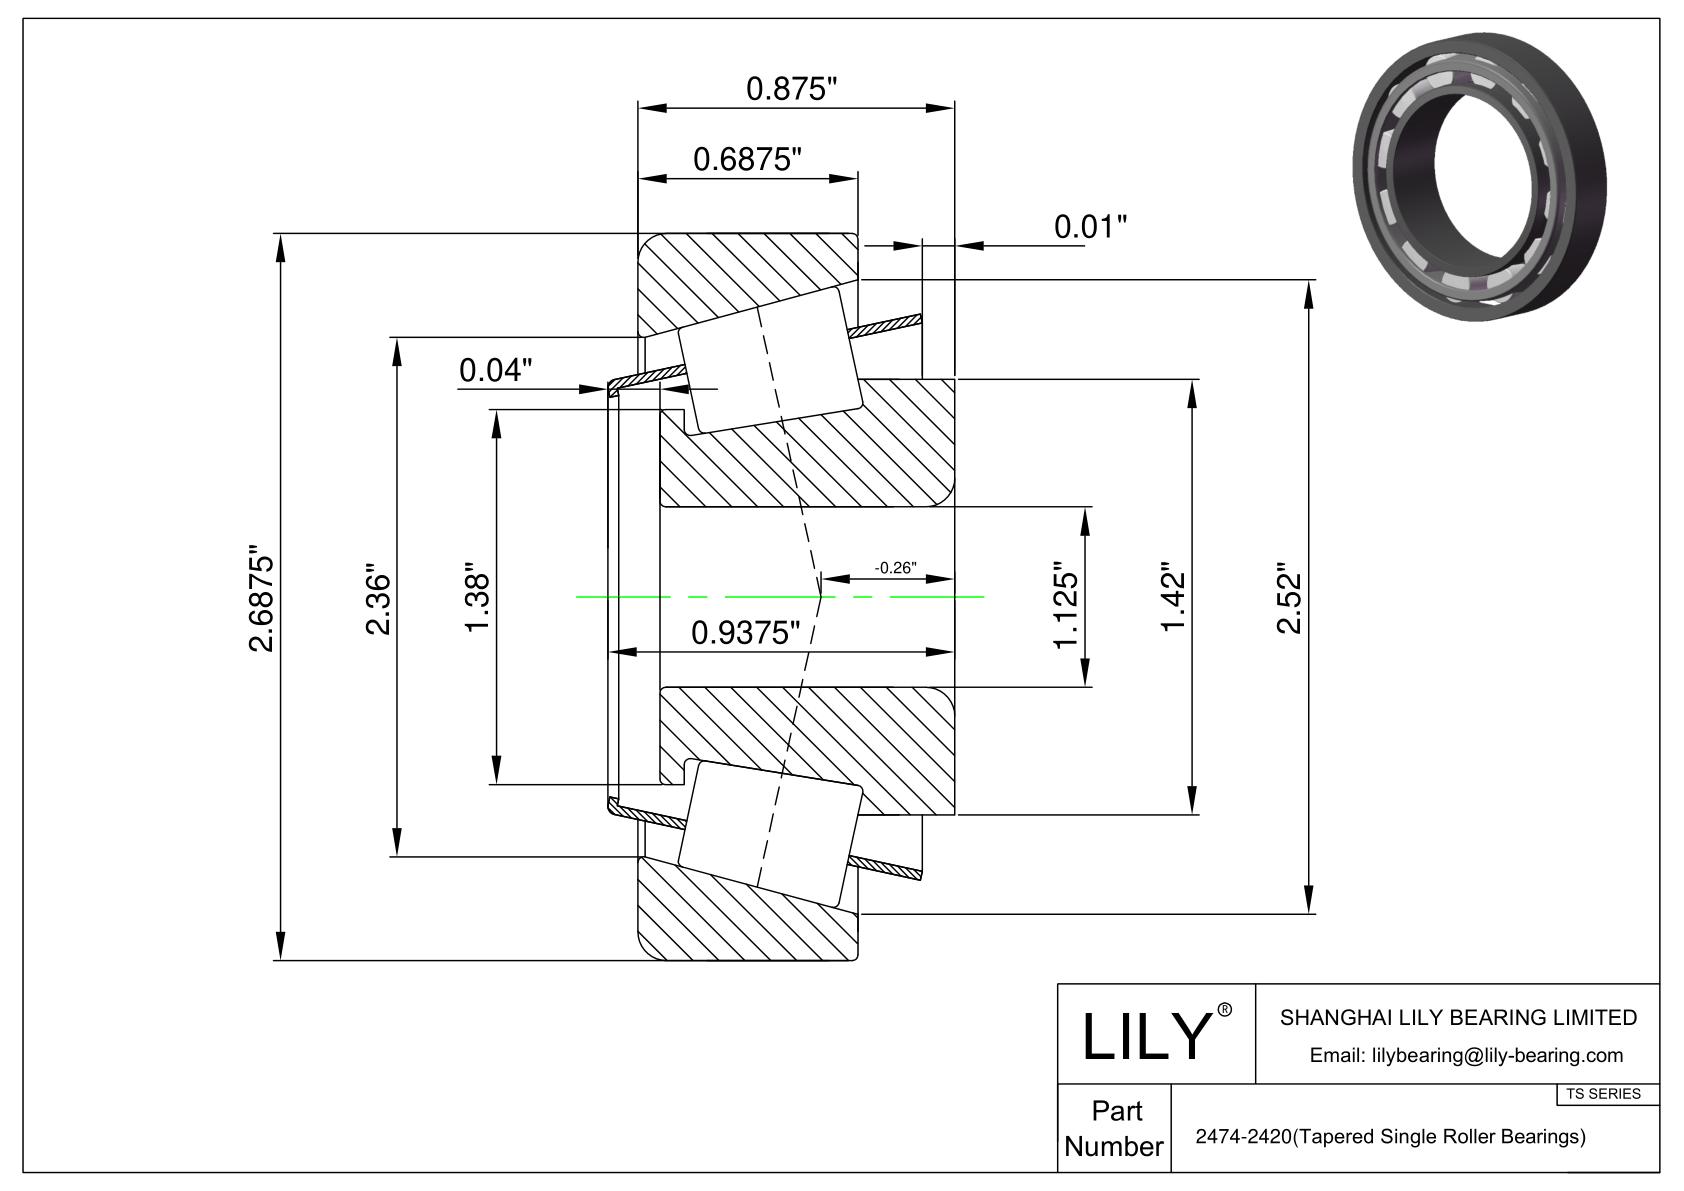 2474-2420 TS (Tapered Single Roller Bearings) (Imperial) cad drawing